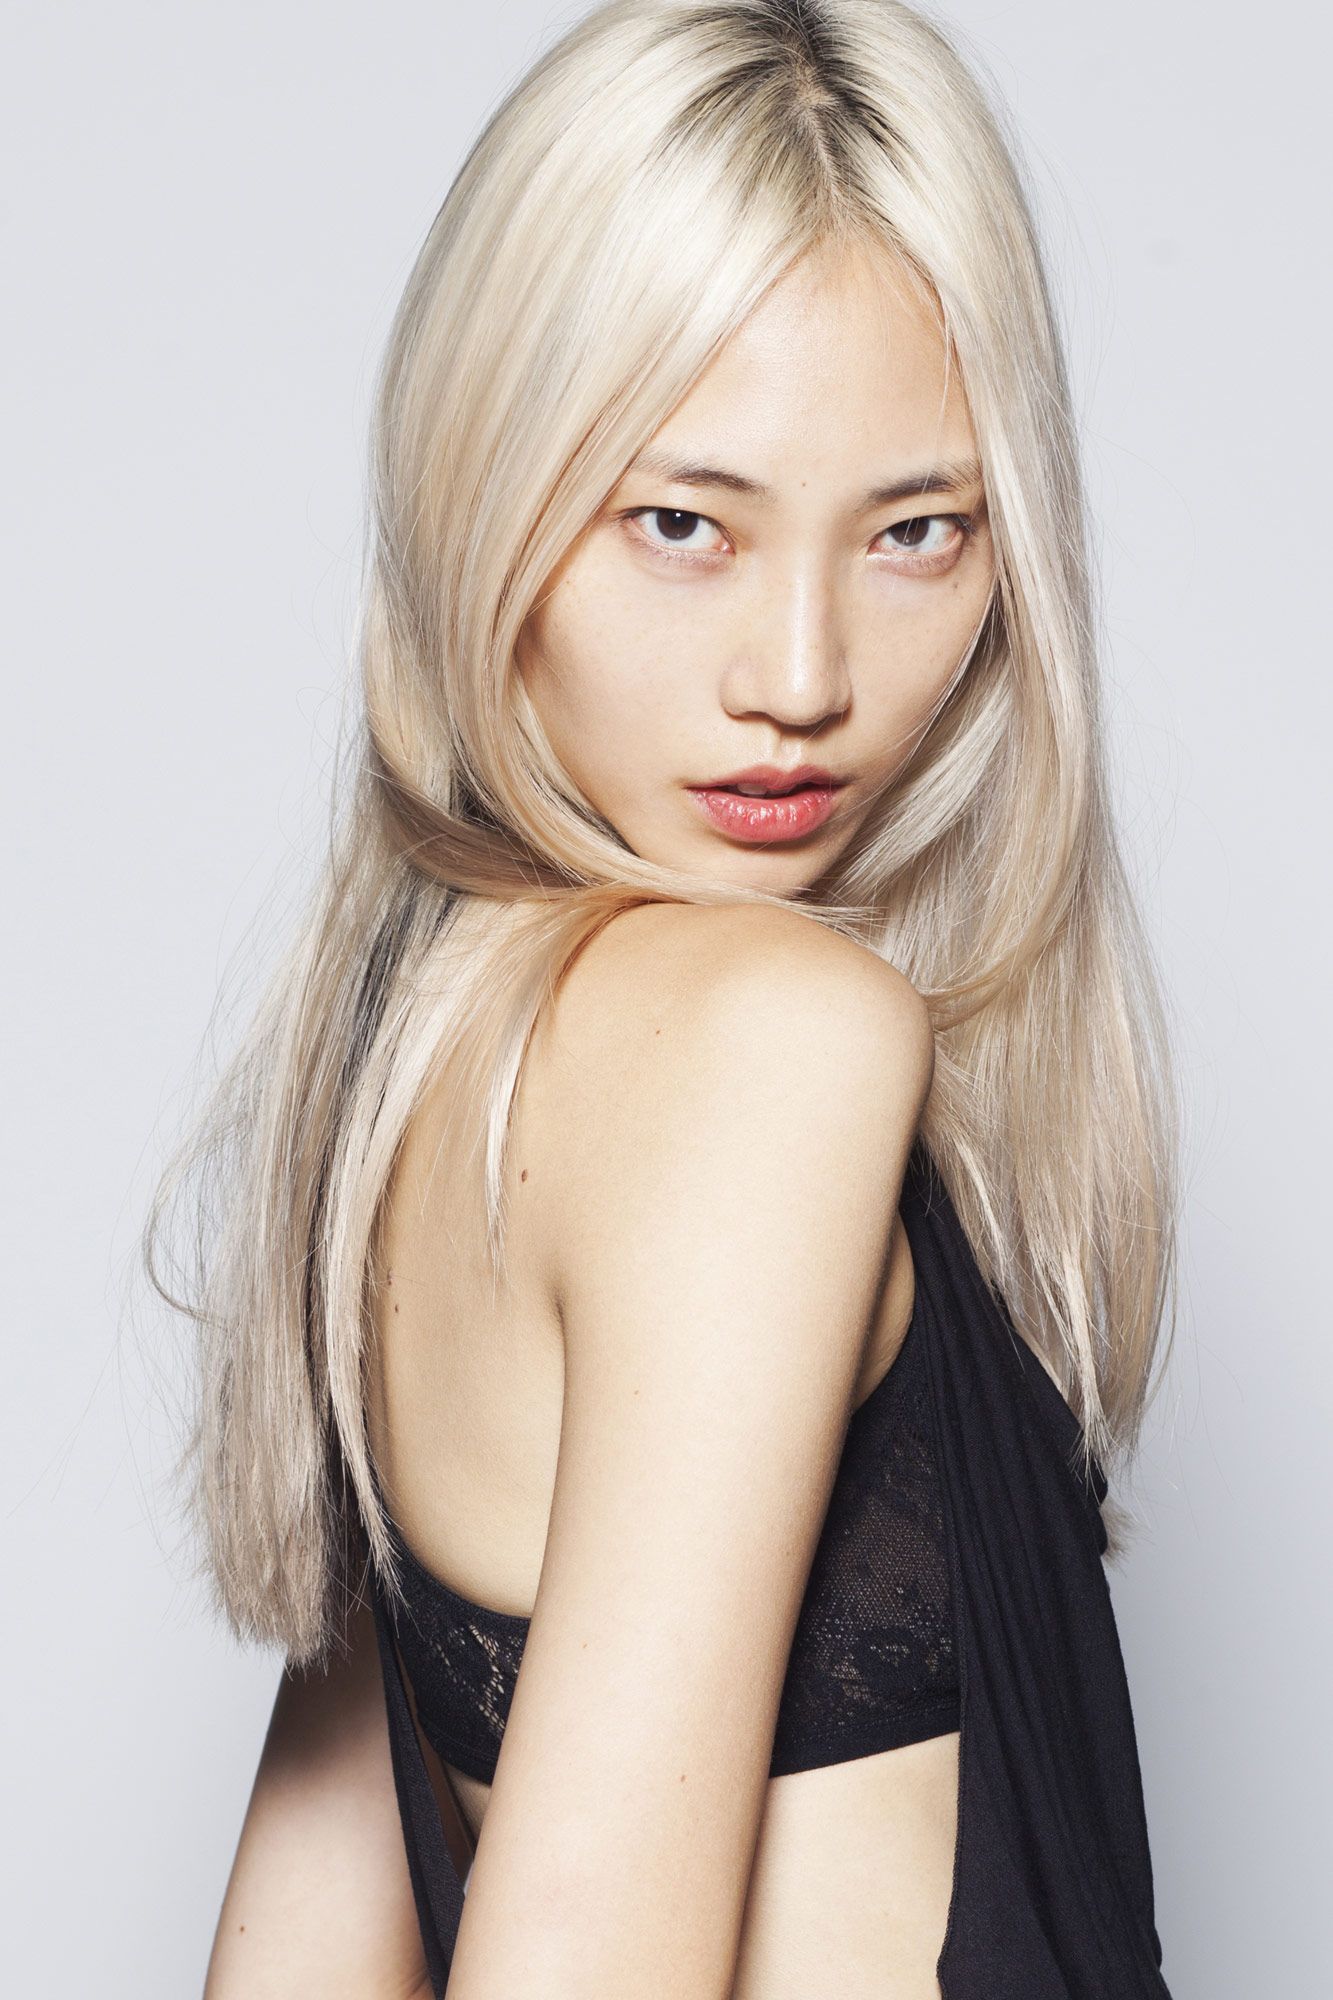 Soo Joo Park Doesn’t Want to Be Typecast As an Asian Model